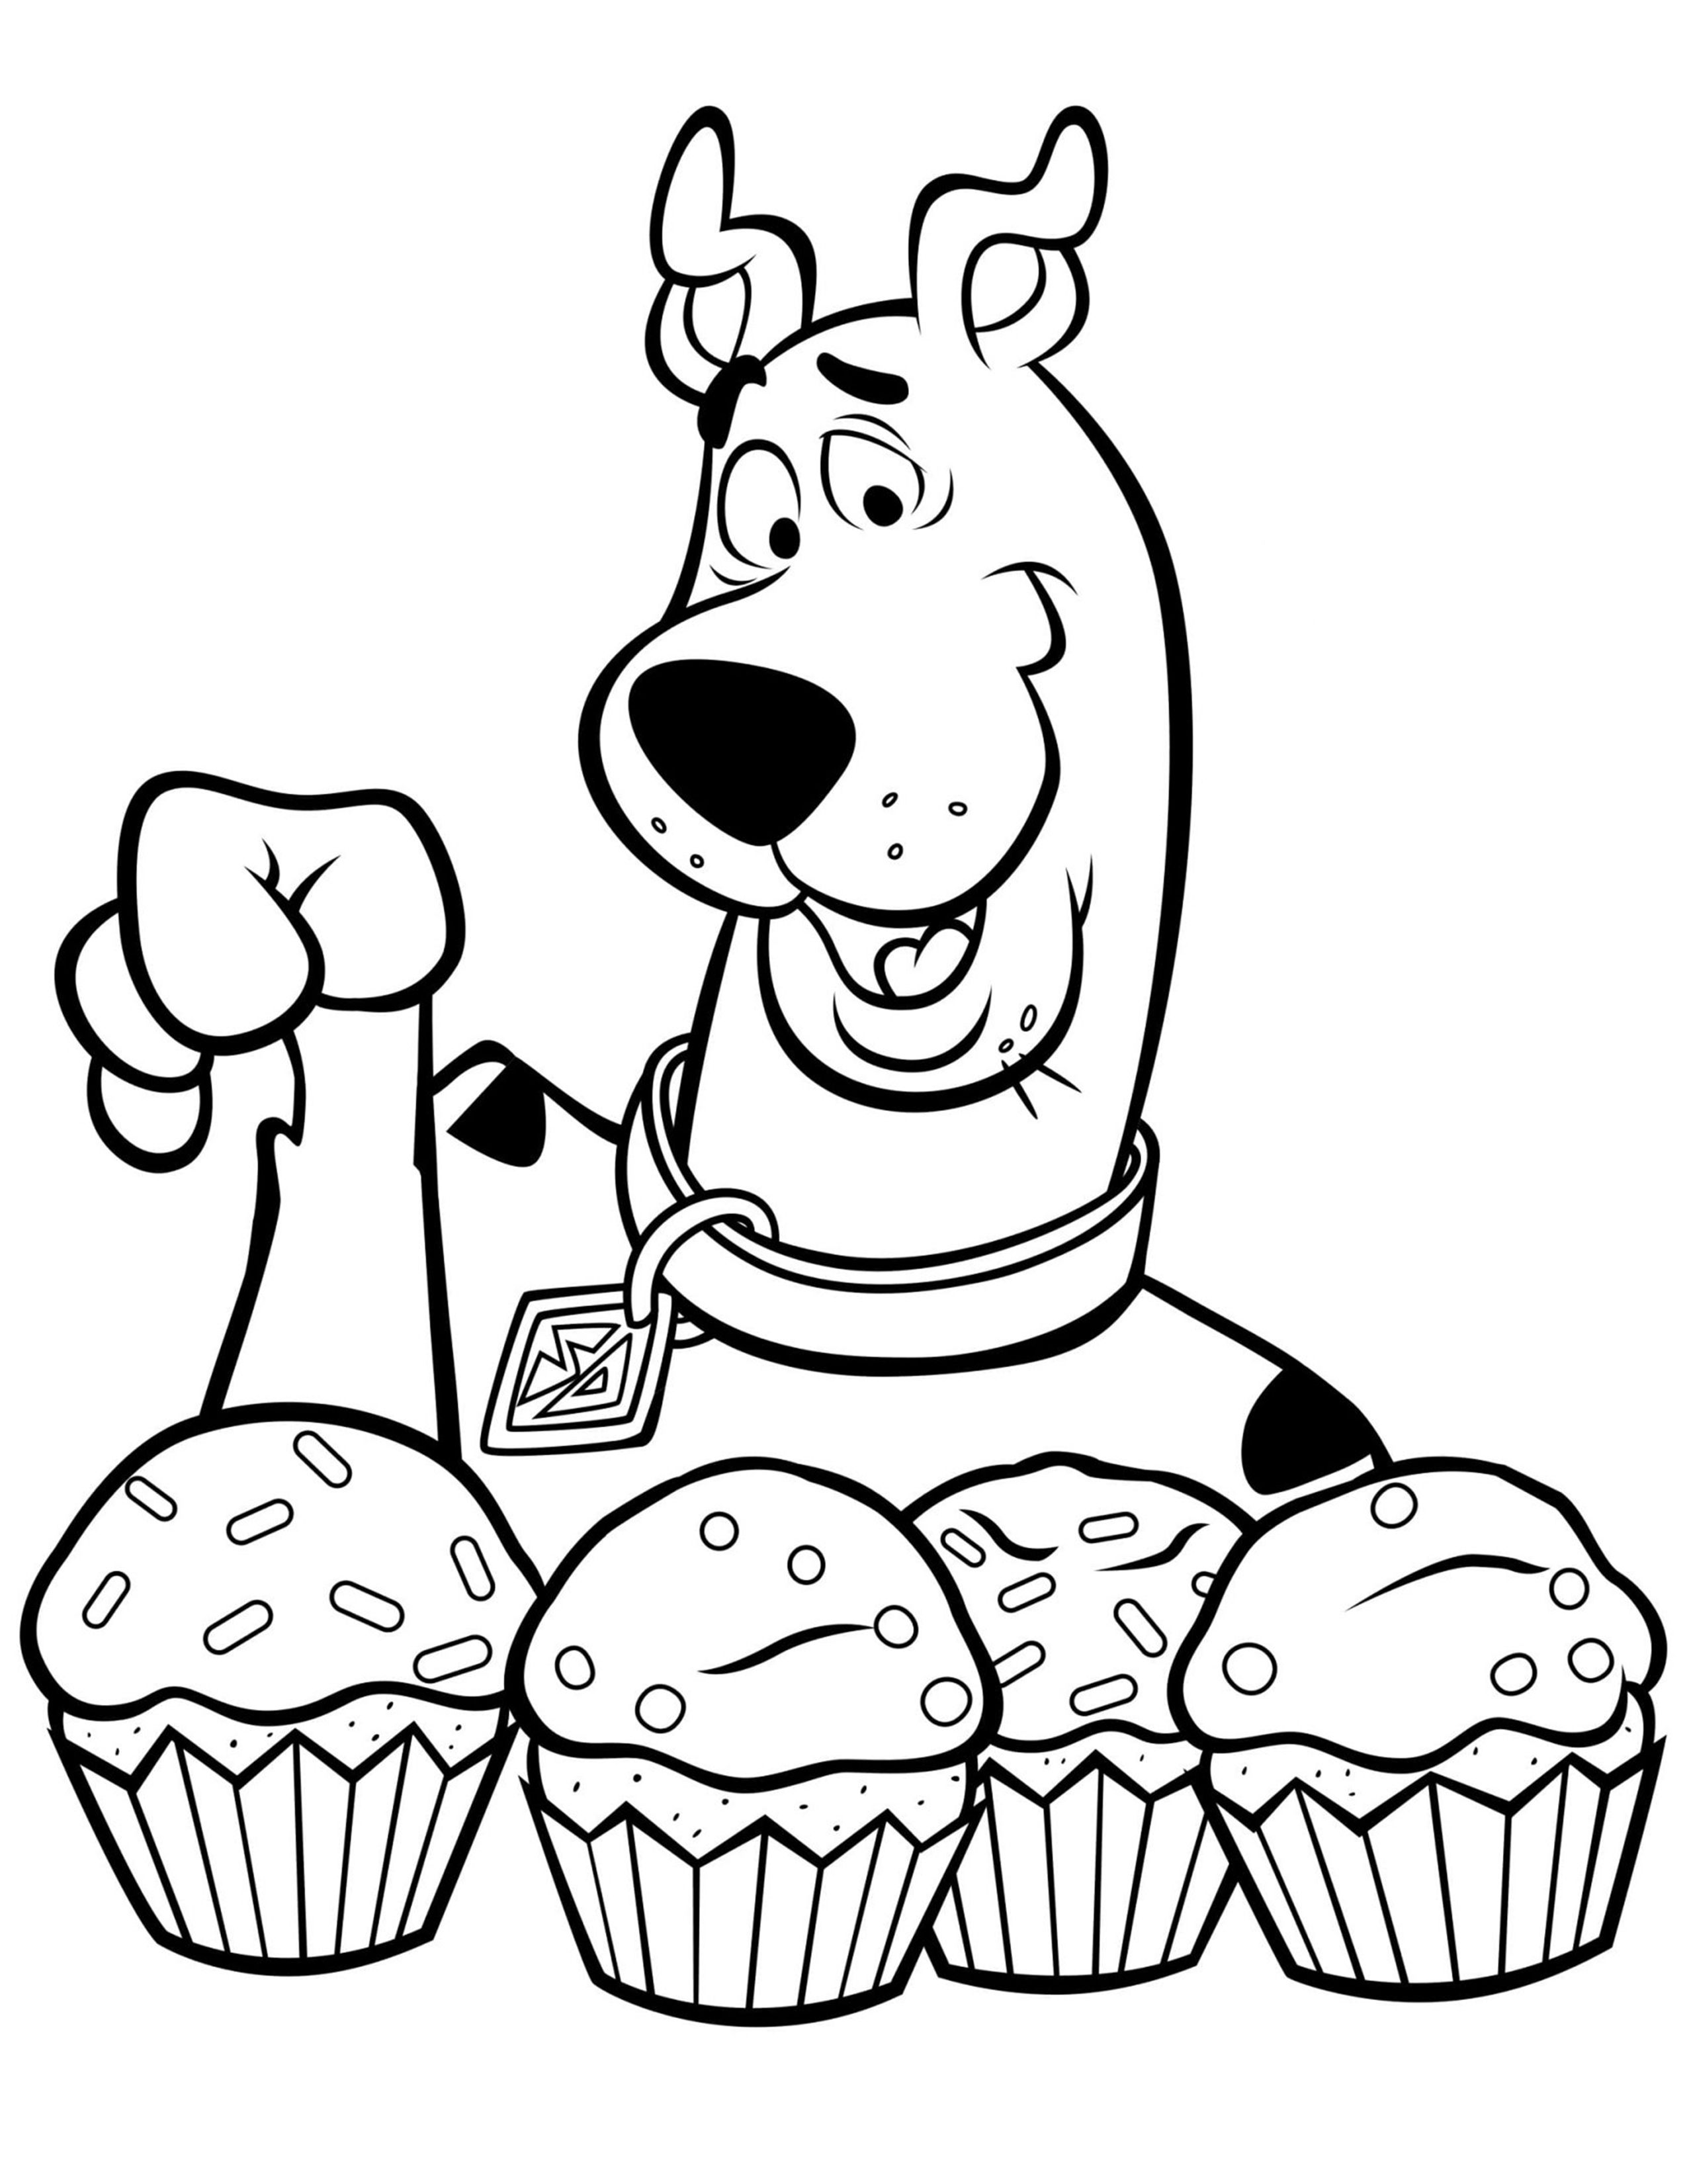 Scooby doo coloring pages for kids scooby doo coloring pages free coloring pages coloring books